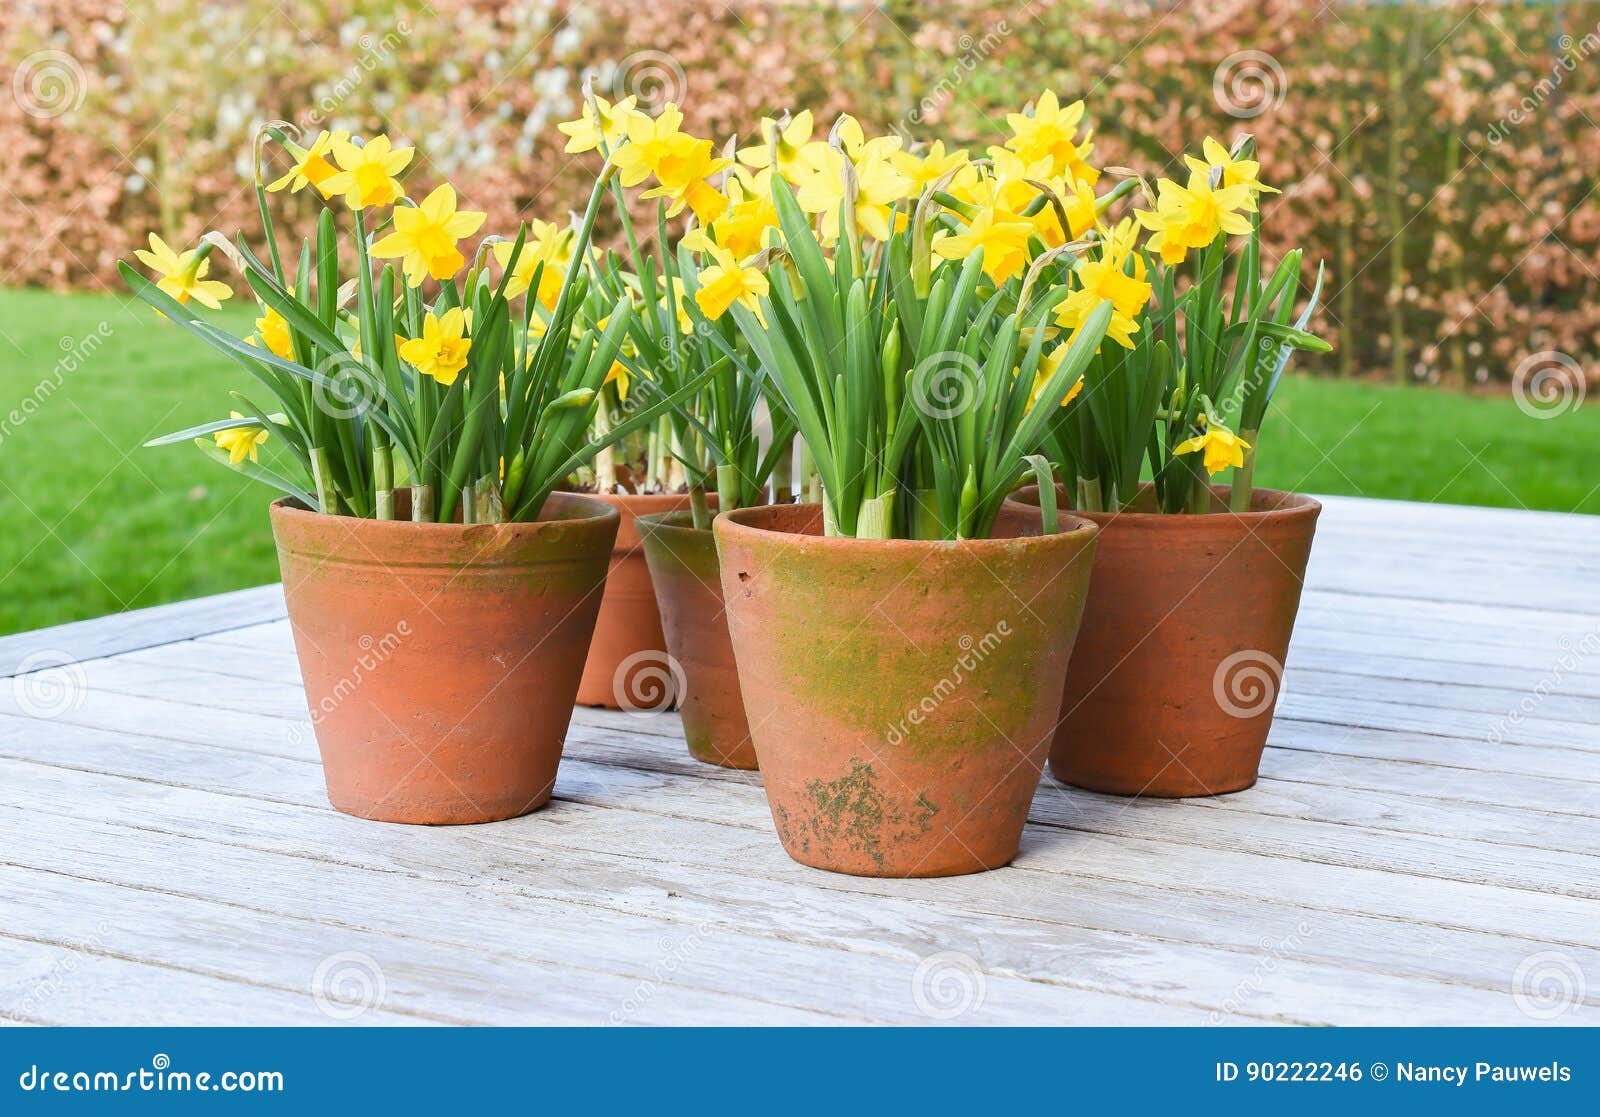 184 Narcissus Tete Tete Stock Photos - Free & Royalty-Free Stock Photos  from Dreamstime